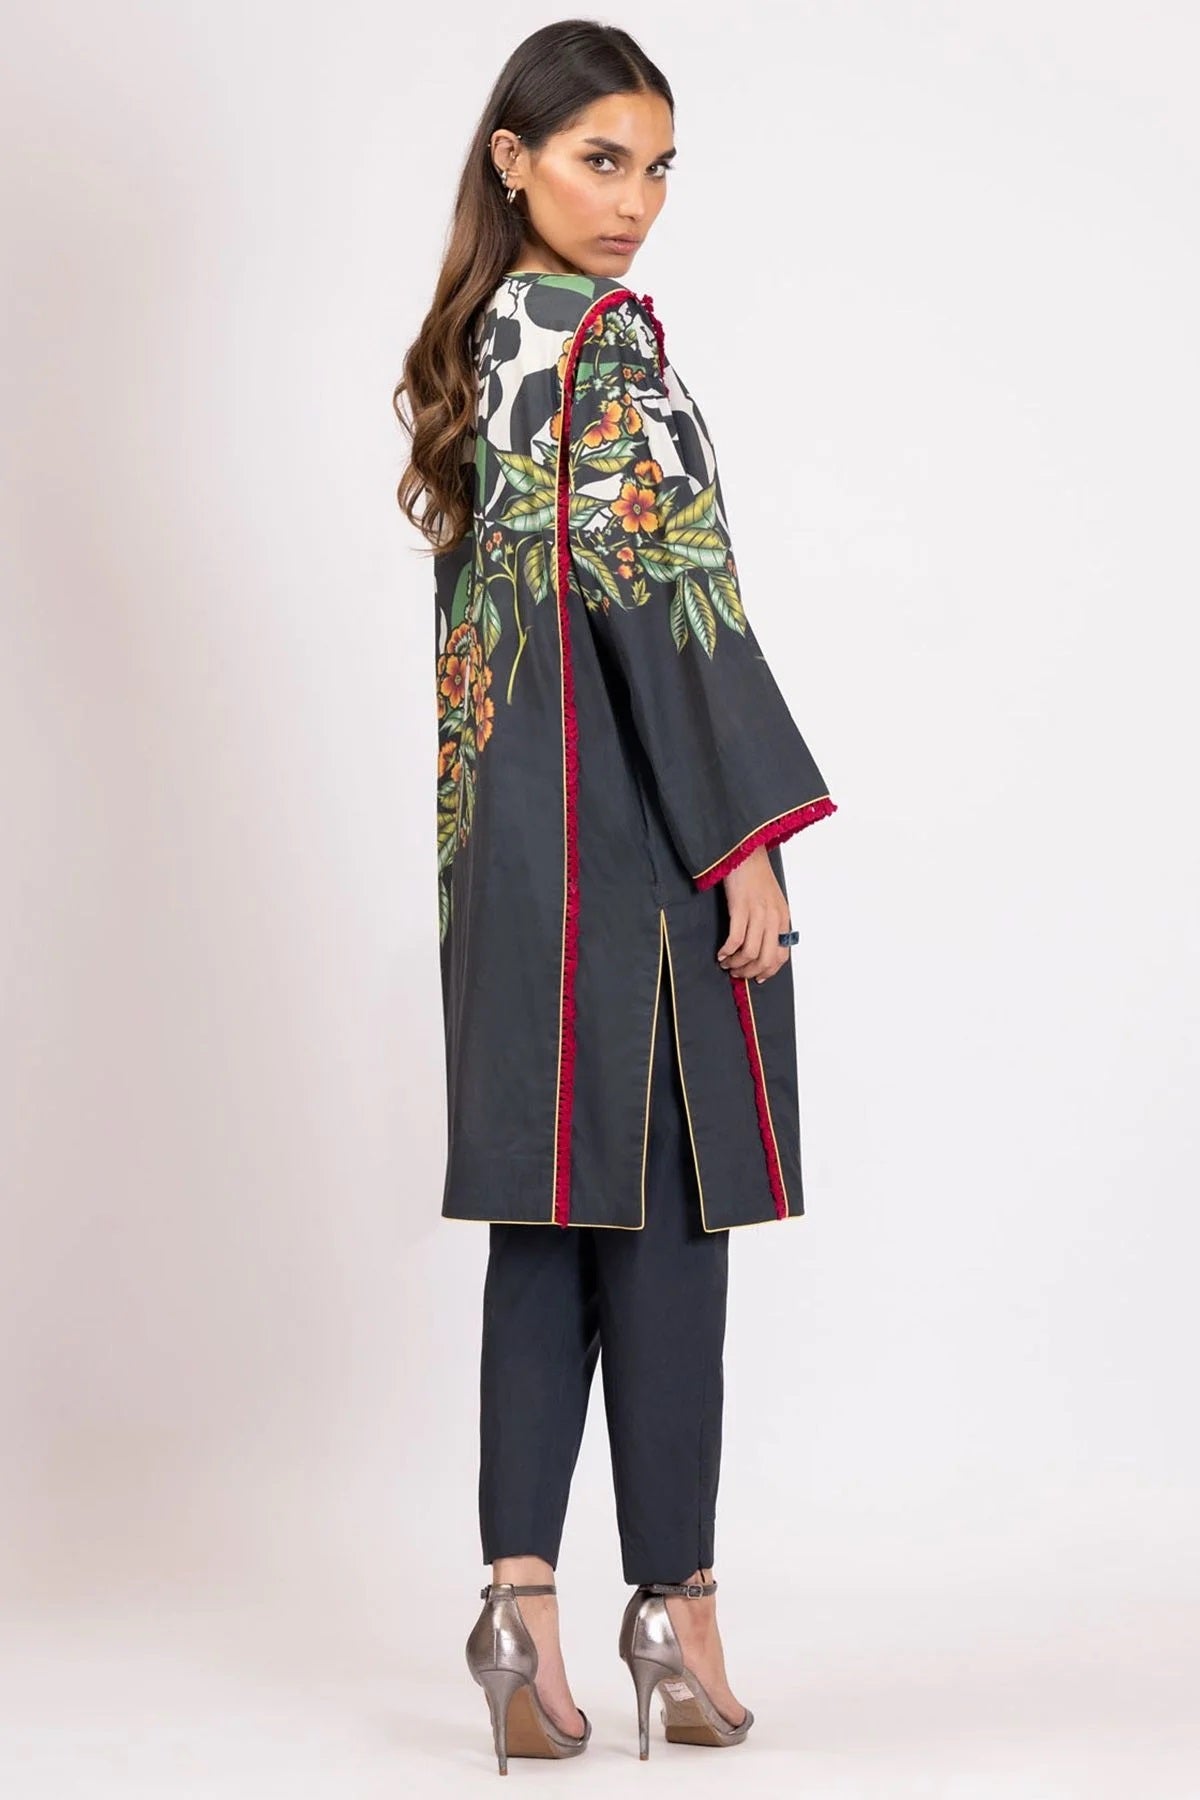 Al Karam Printed Lawn Suits Unstitched 2 Piece SS-51-22 Black - Summer Collection